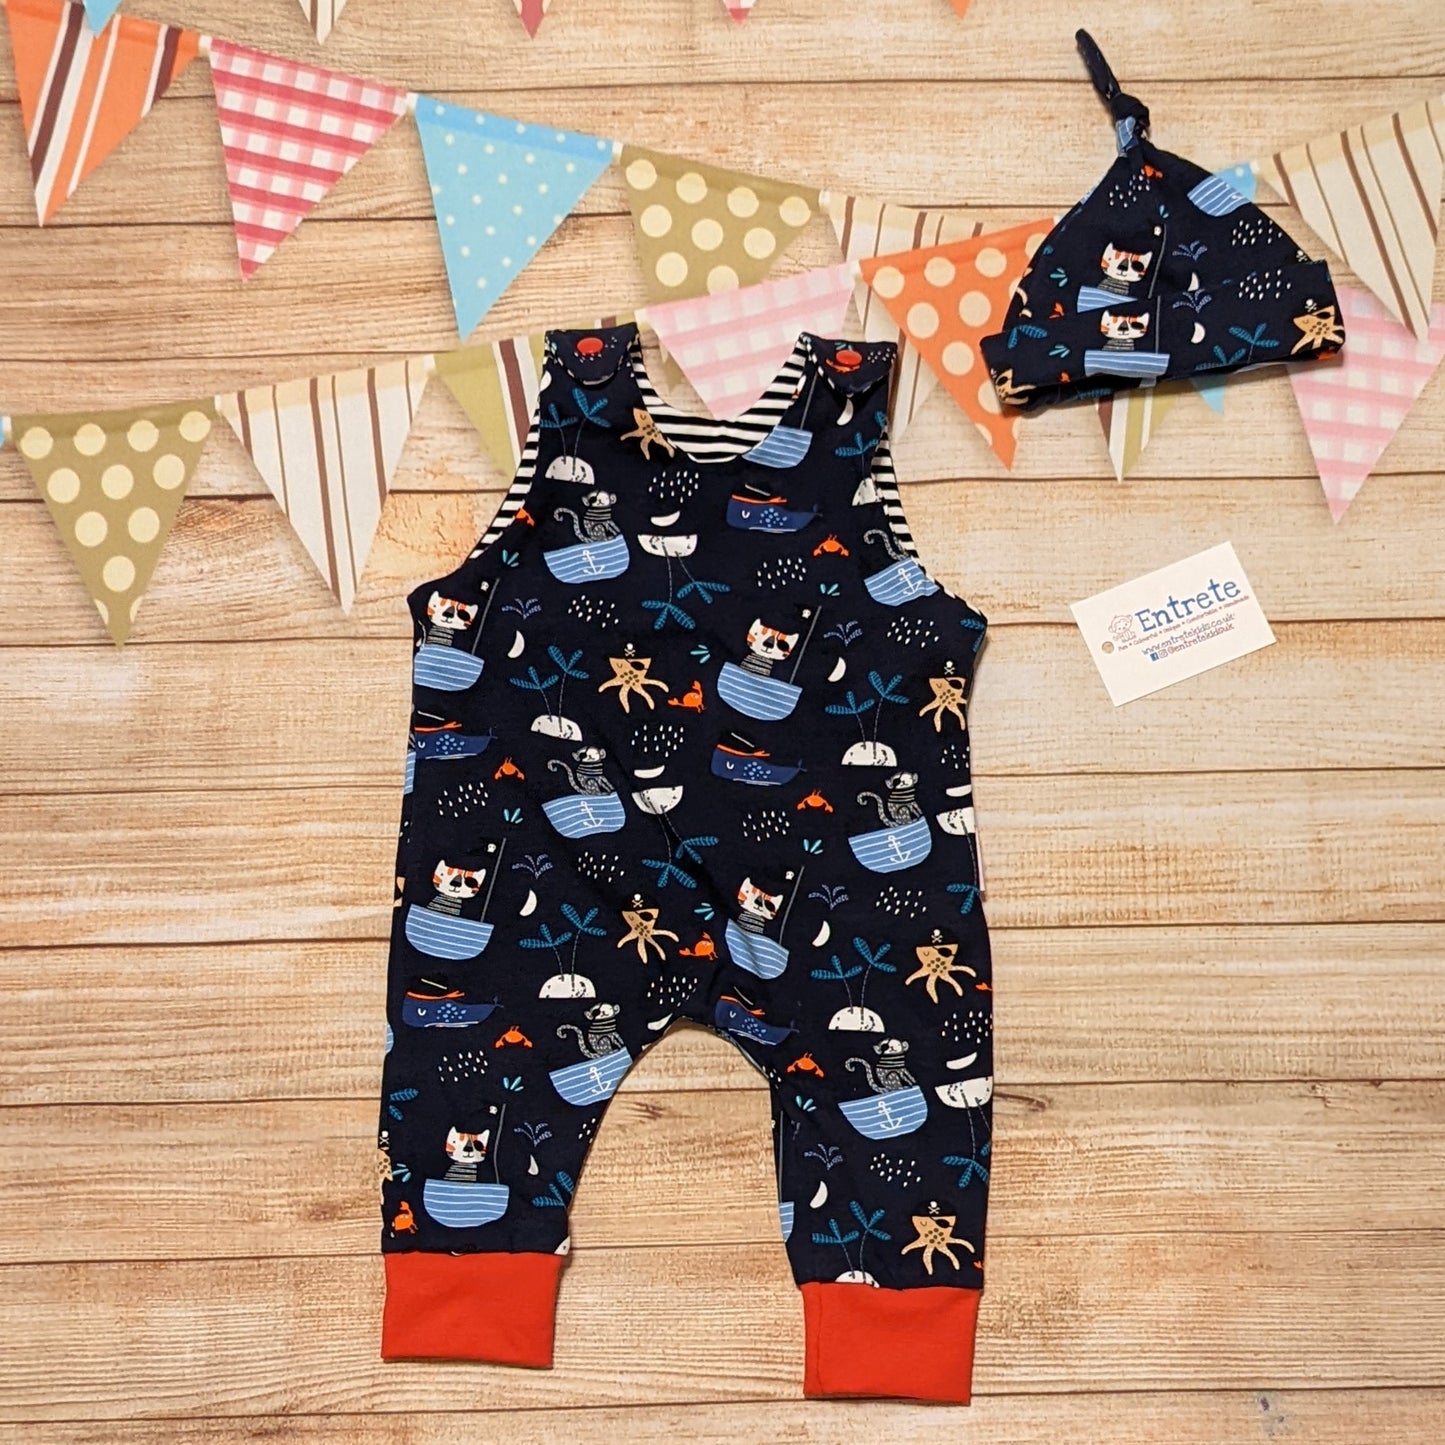 Fun and adventure await, with the pirate cats sleeveless romper. Shown with a matching tie top hat (sold separately). Handmade using pirate cats, red and monochrome striped cotton jersey's.